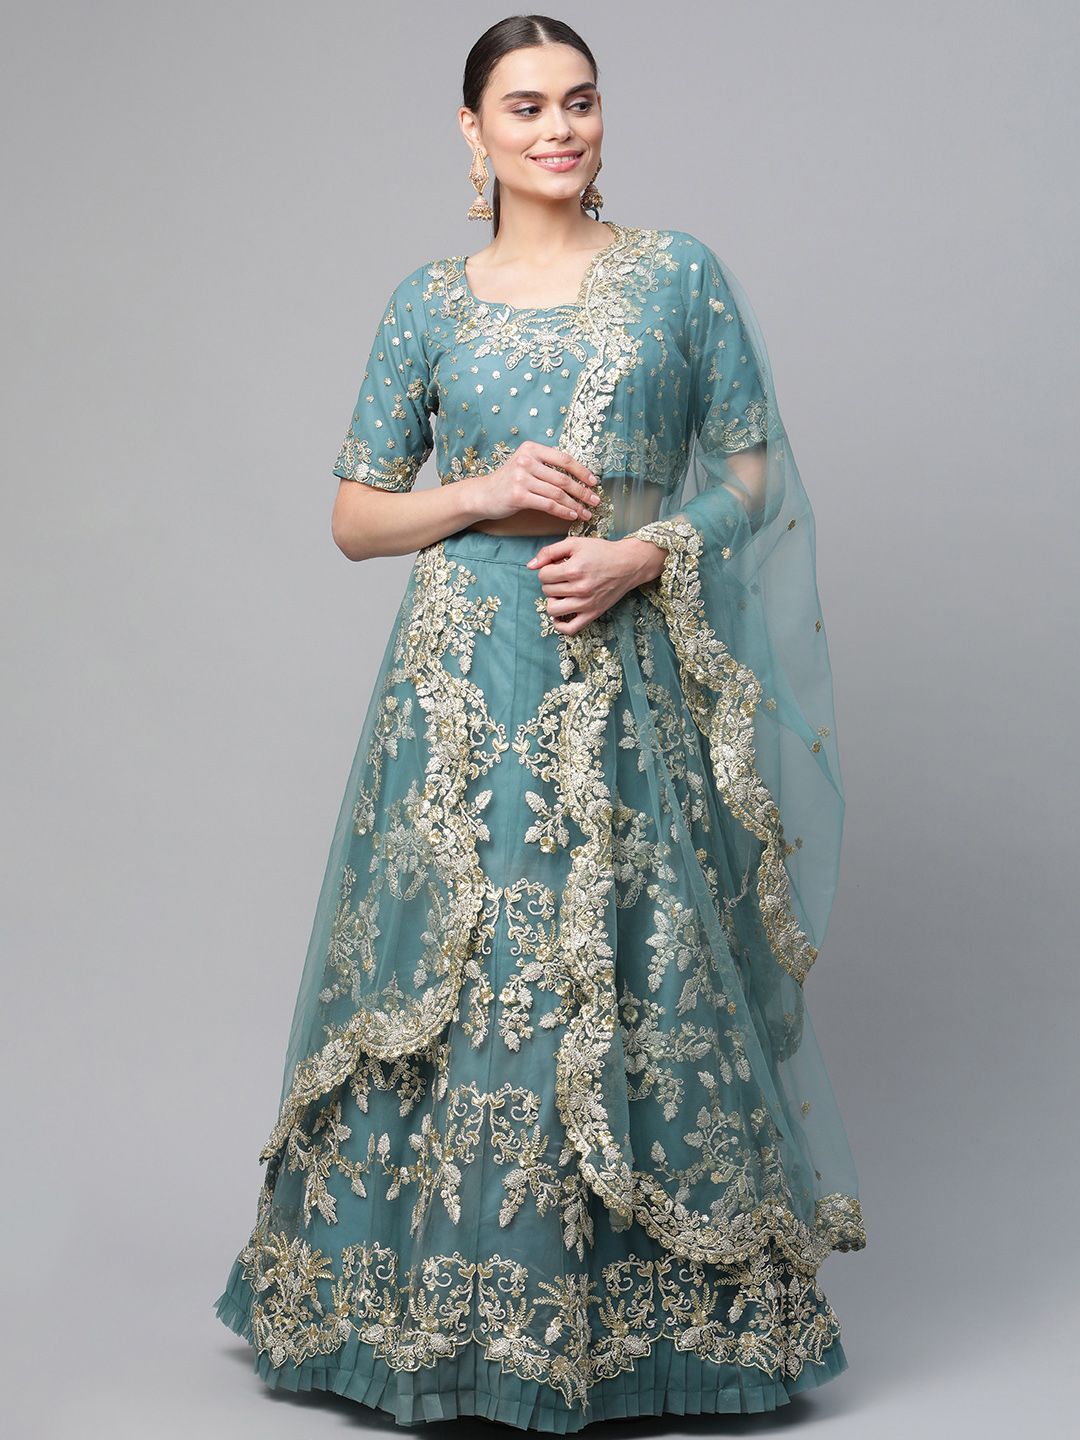 Readiprint Fashions Teal & Gold-Toned Embroidered Semi-Stitched Lehenga & Unstitched Blouse With Dupatta Price in India